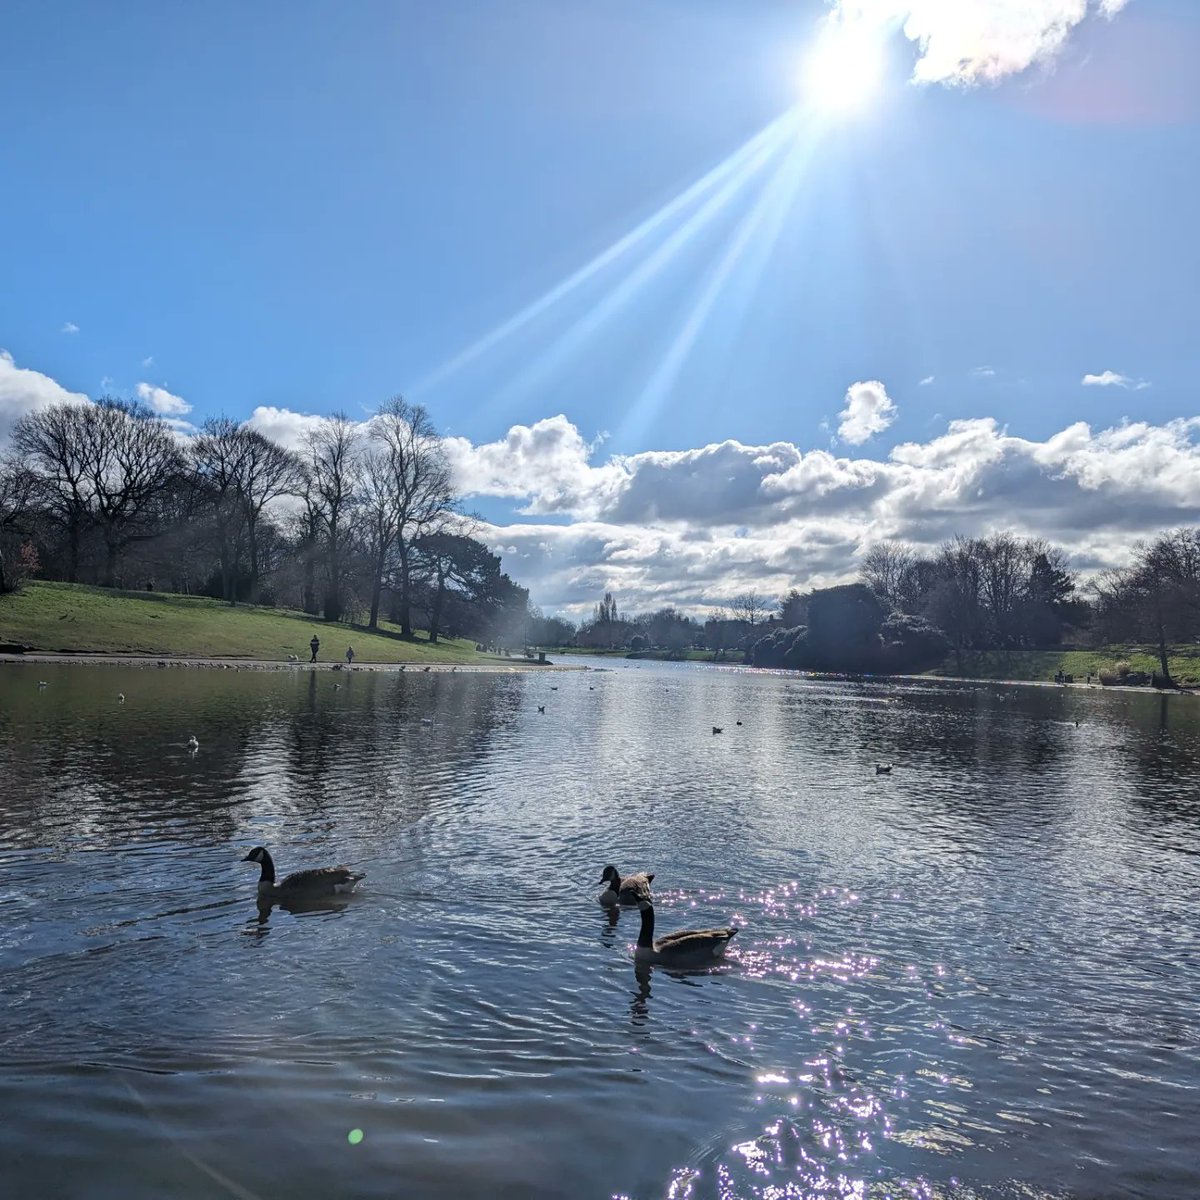 #SeftonPark at lunchtime